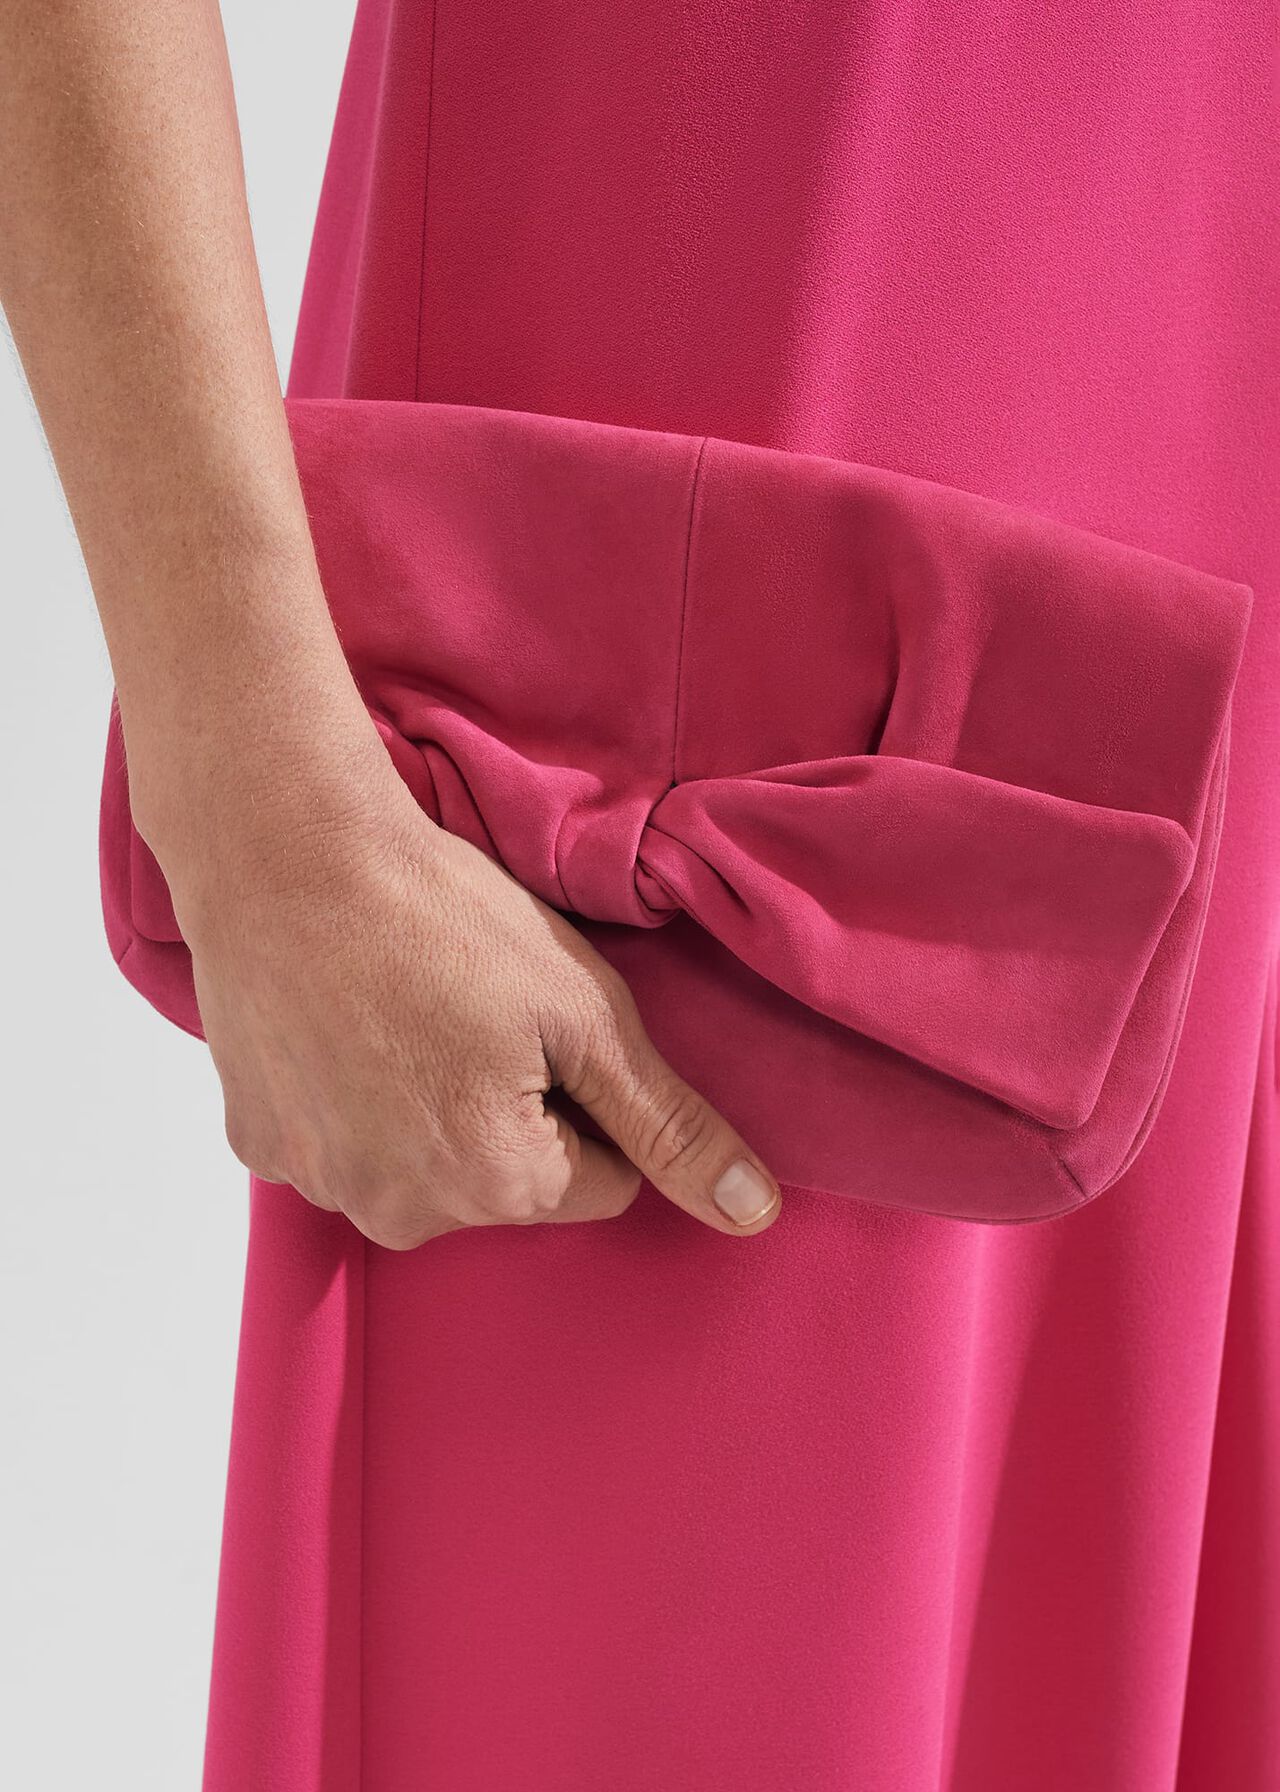 Milly Bow Clutch, Bright Pink, hi-res